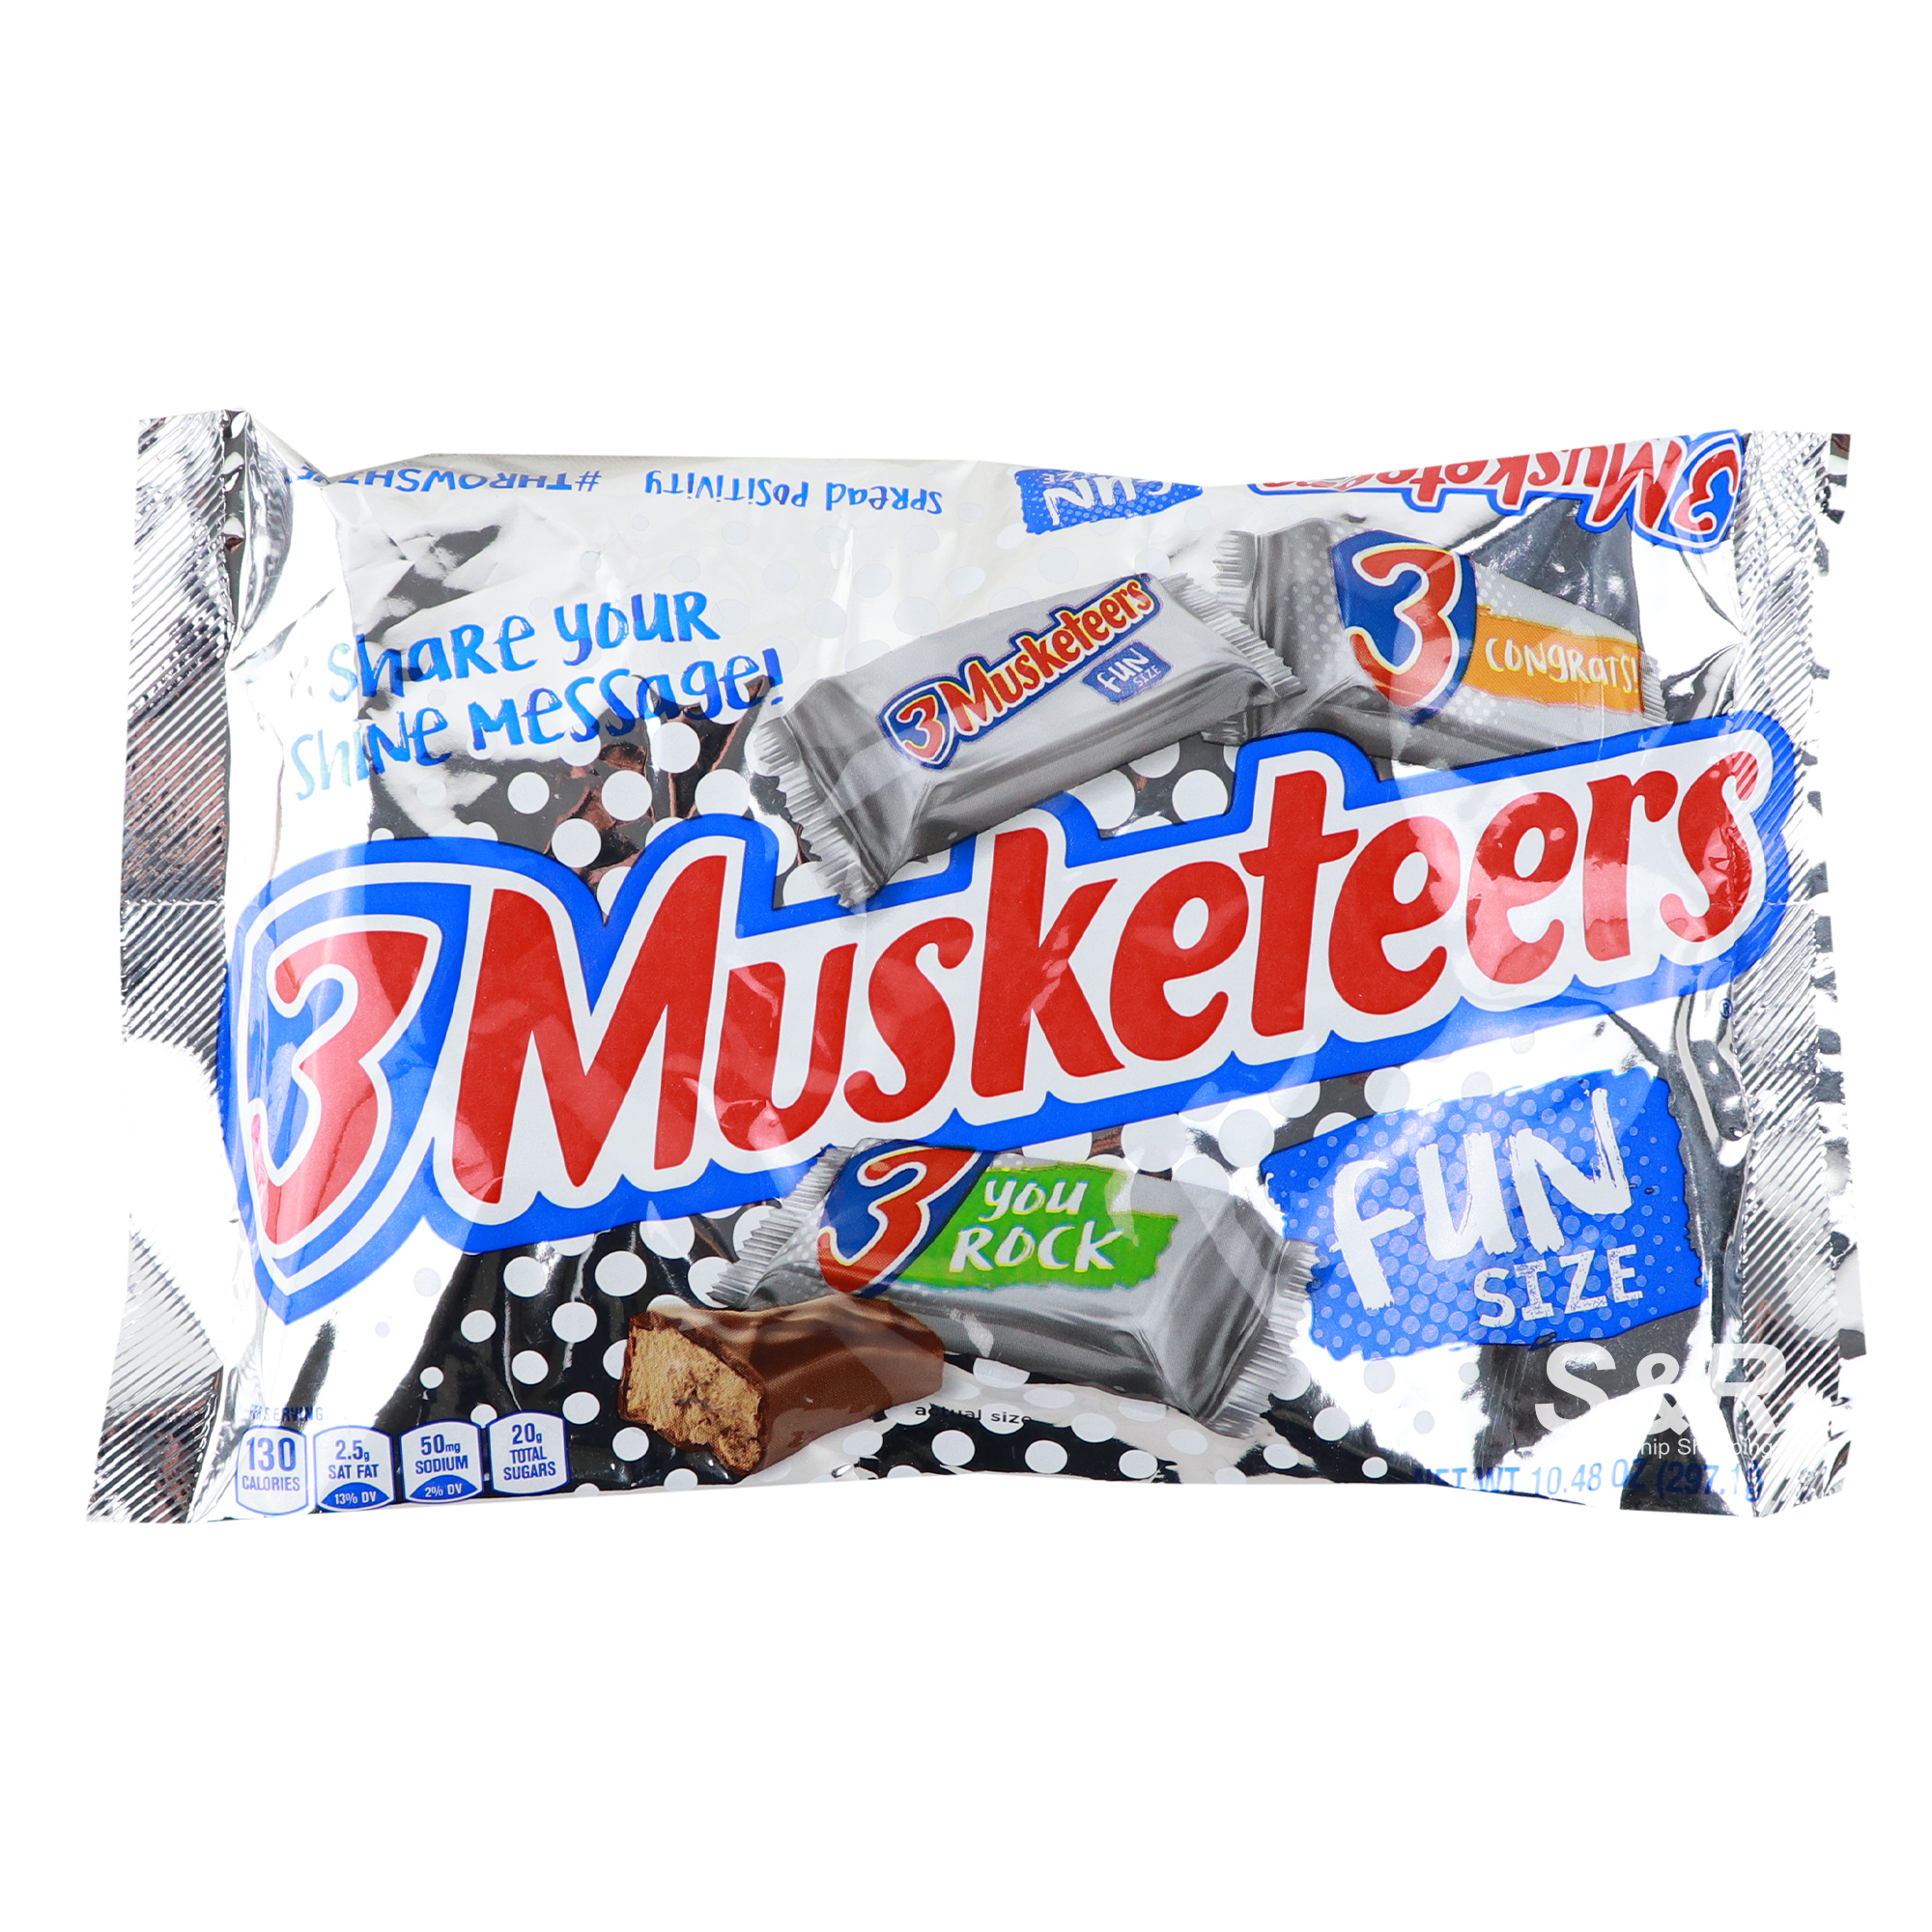 3 Musketeers Fun Size Chocolate Snack 297.1g